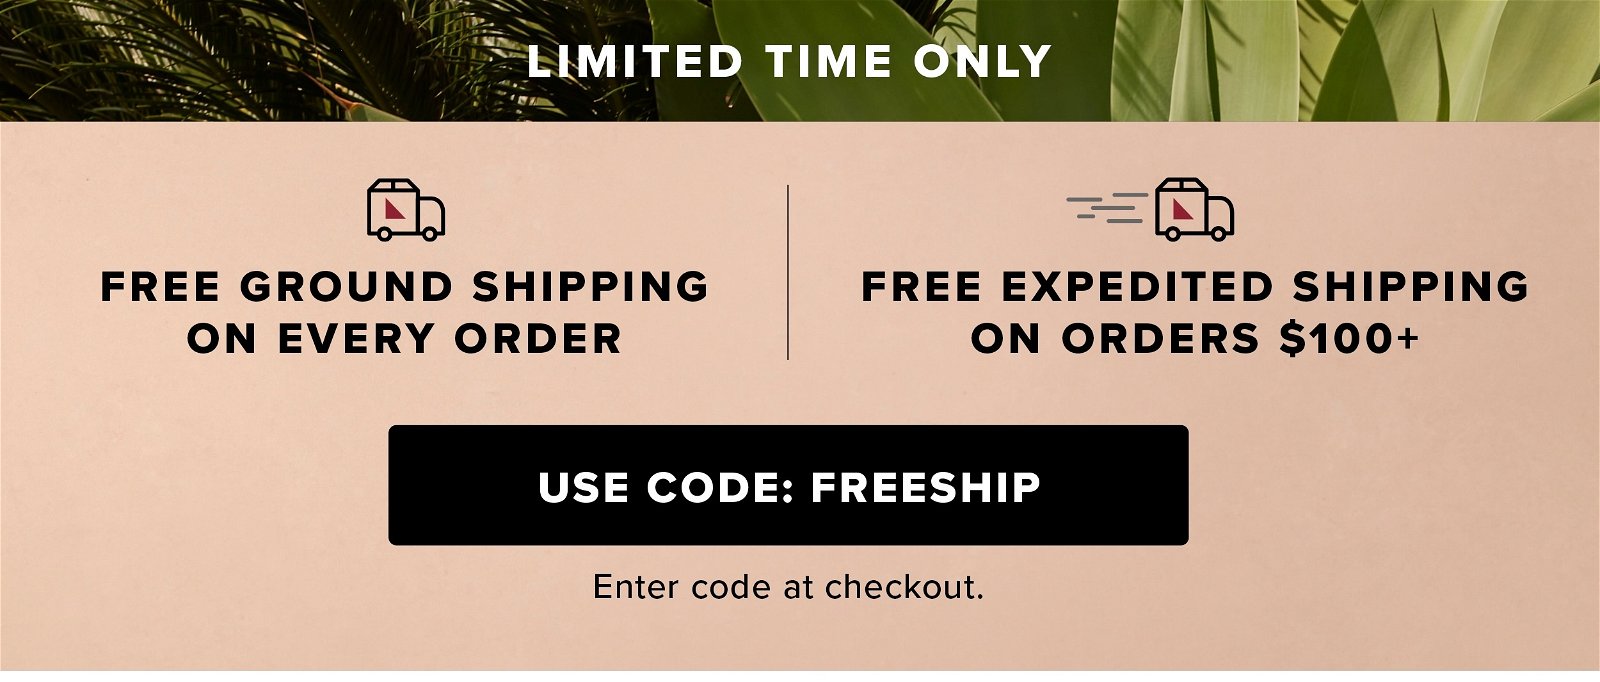 Limited Time Only: Free Shipping